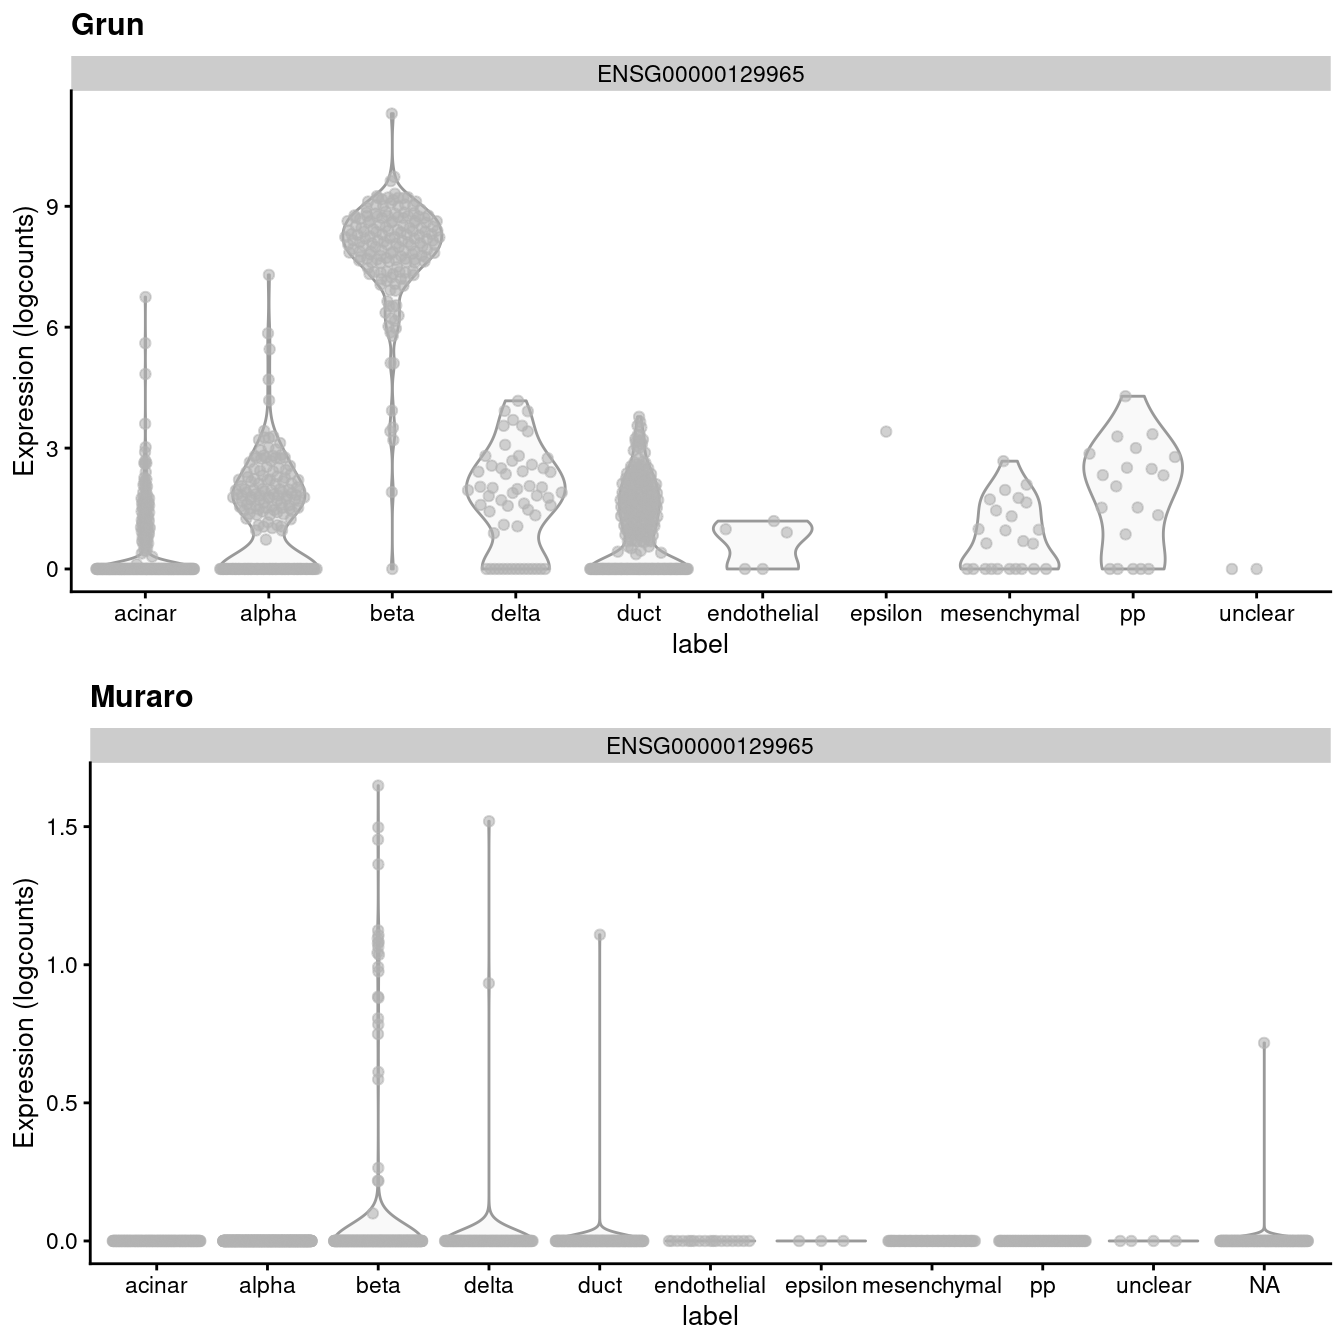 Distribution of uncorrected expression values for _INS-IGF2_ across the cell types in the Grun and Muraro pancreas datasets.